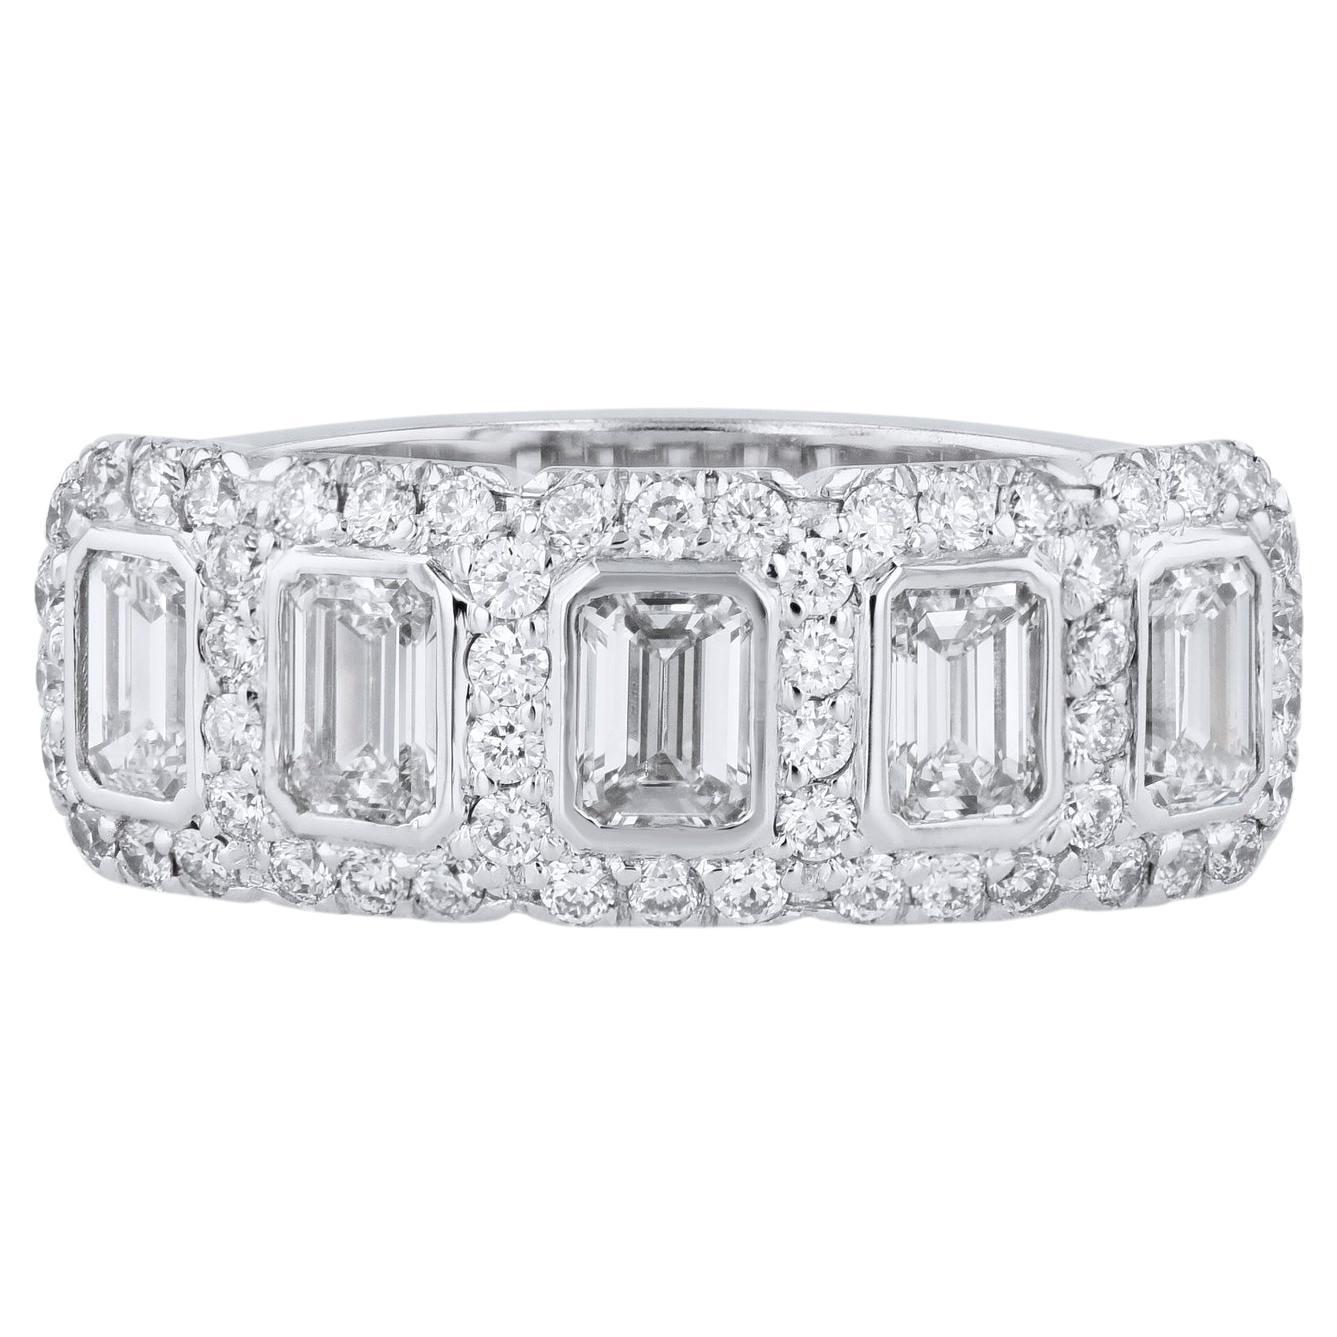 5 Emerald Cut Diamonds and Pave Platinum Anniversary Ring For Sale